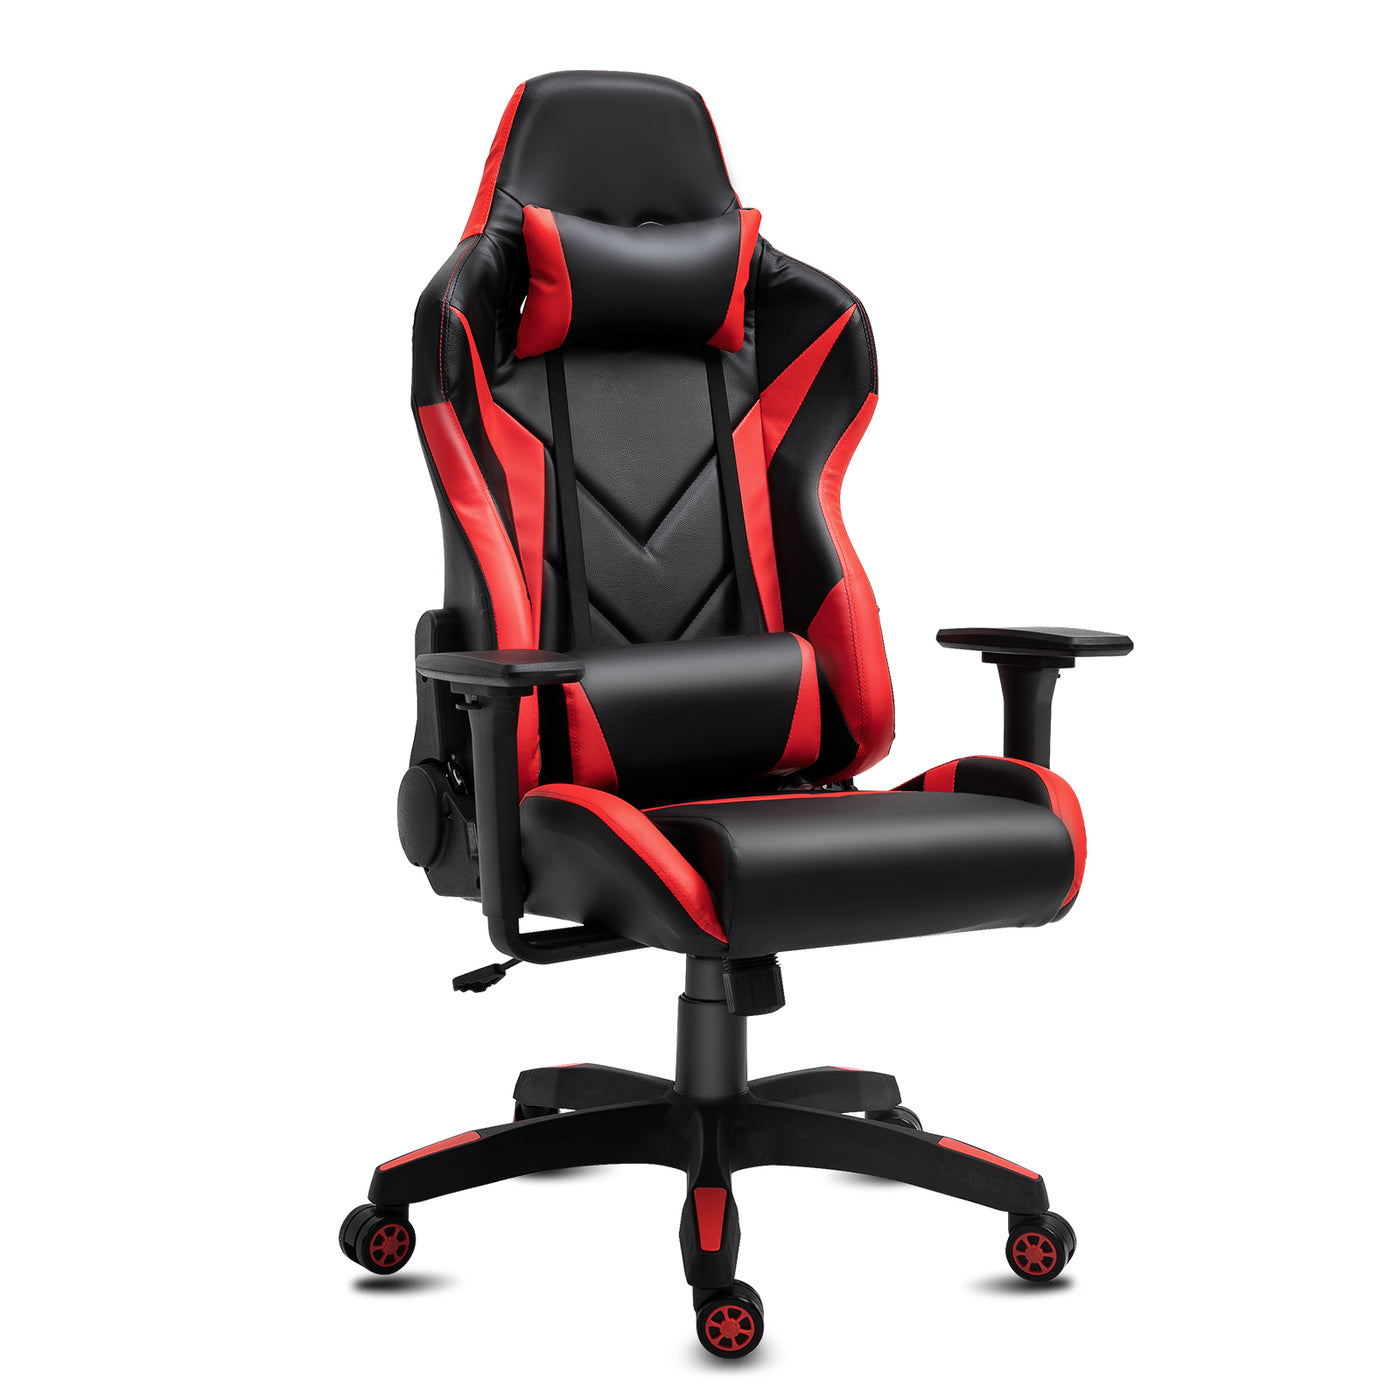 Racing Gaming Chairs Ergonomic Computer Chairs High Back Office Desk 360 Swivel